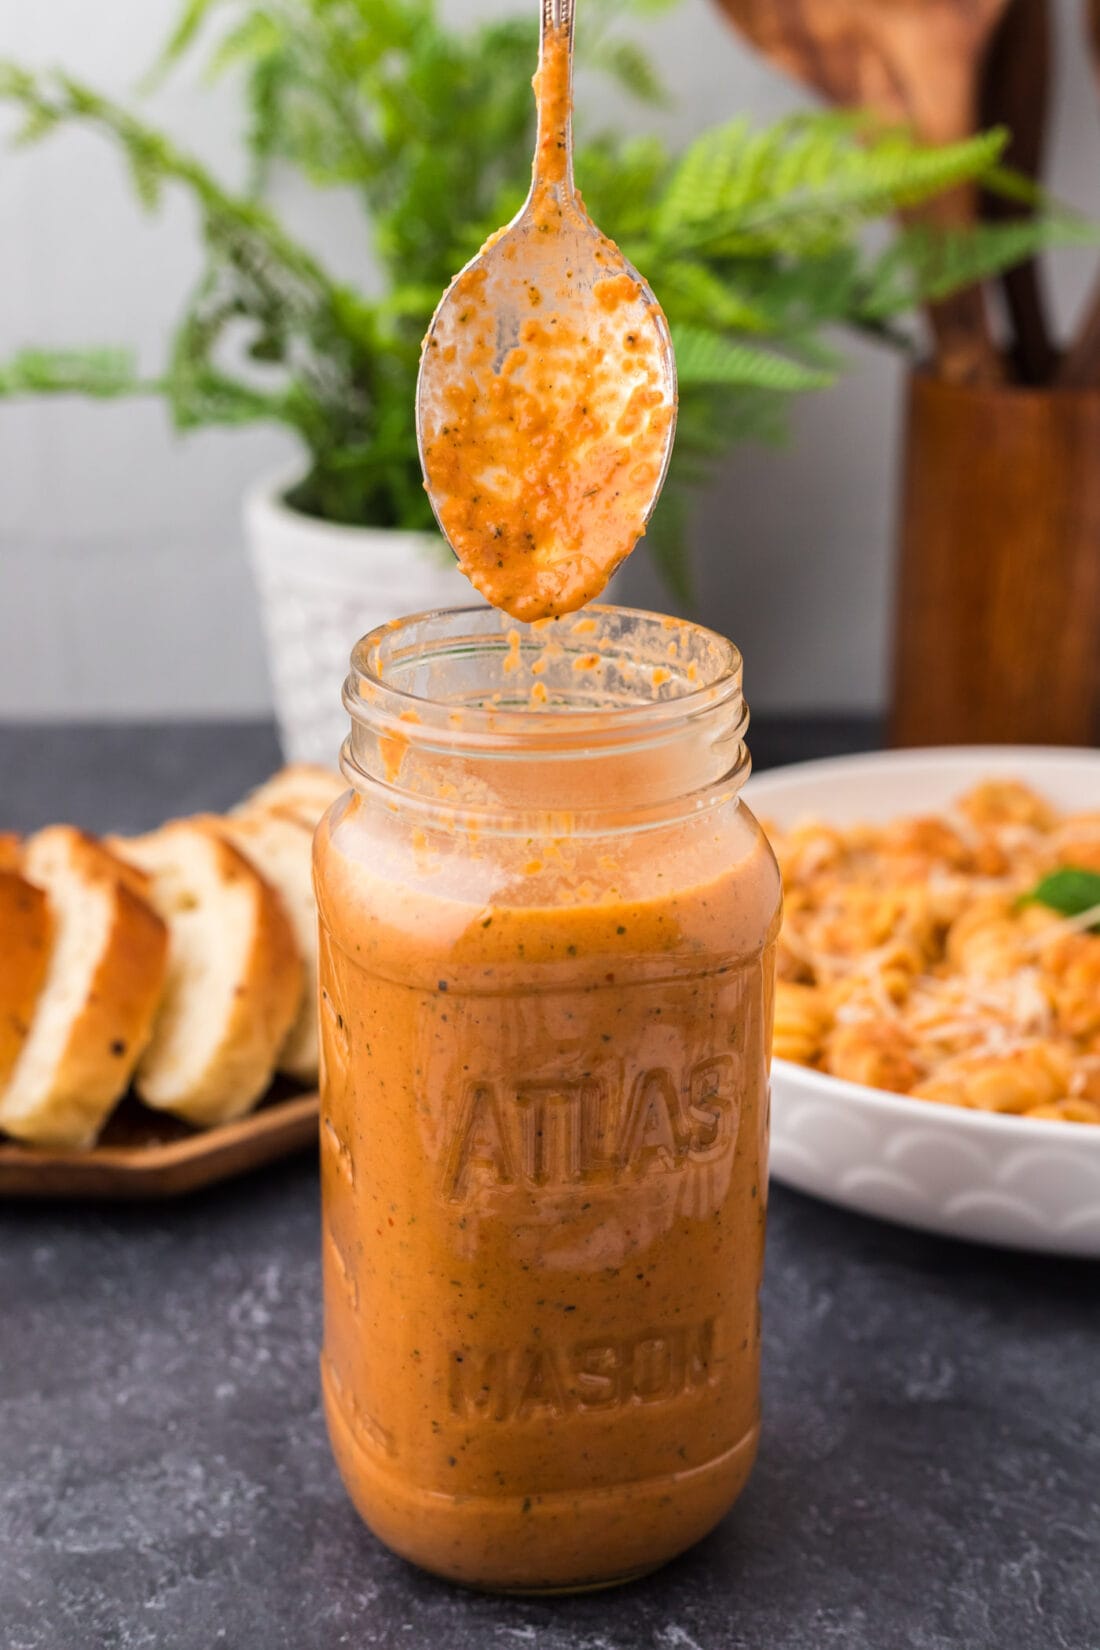 Spoon covered in Vodka Sauce being lifted out of a jar of Vodka Sauce